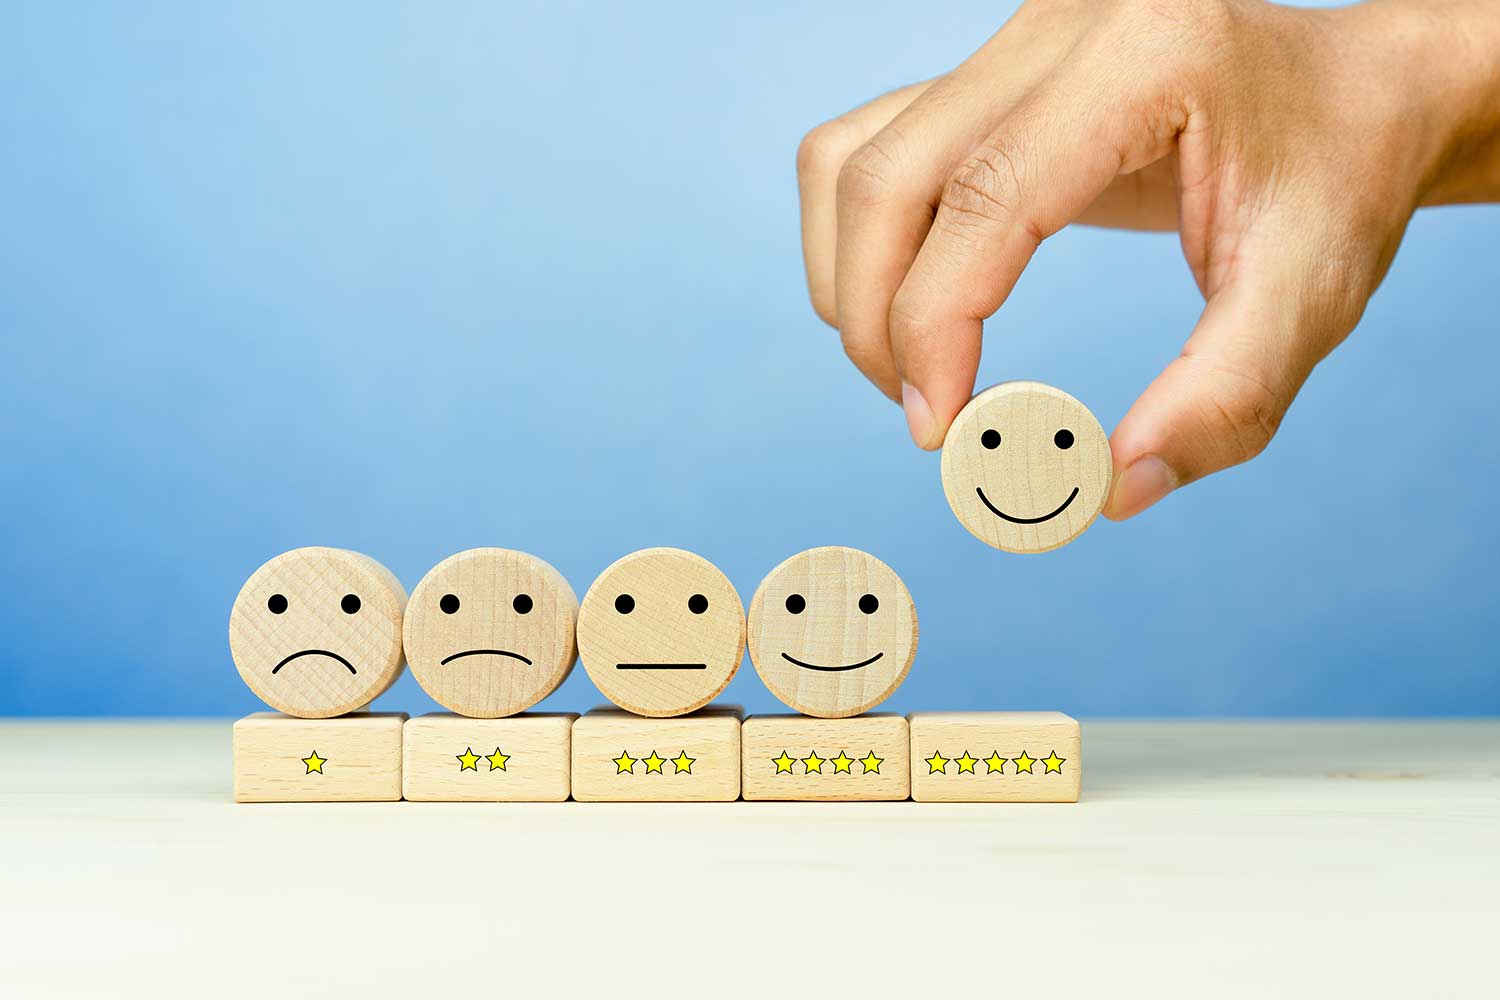 Customer service evaluation and satisfaction survey concepts